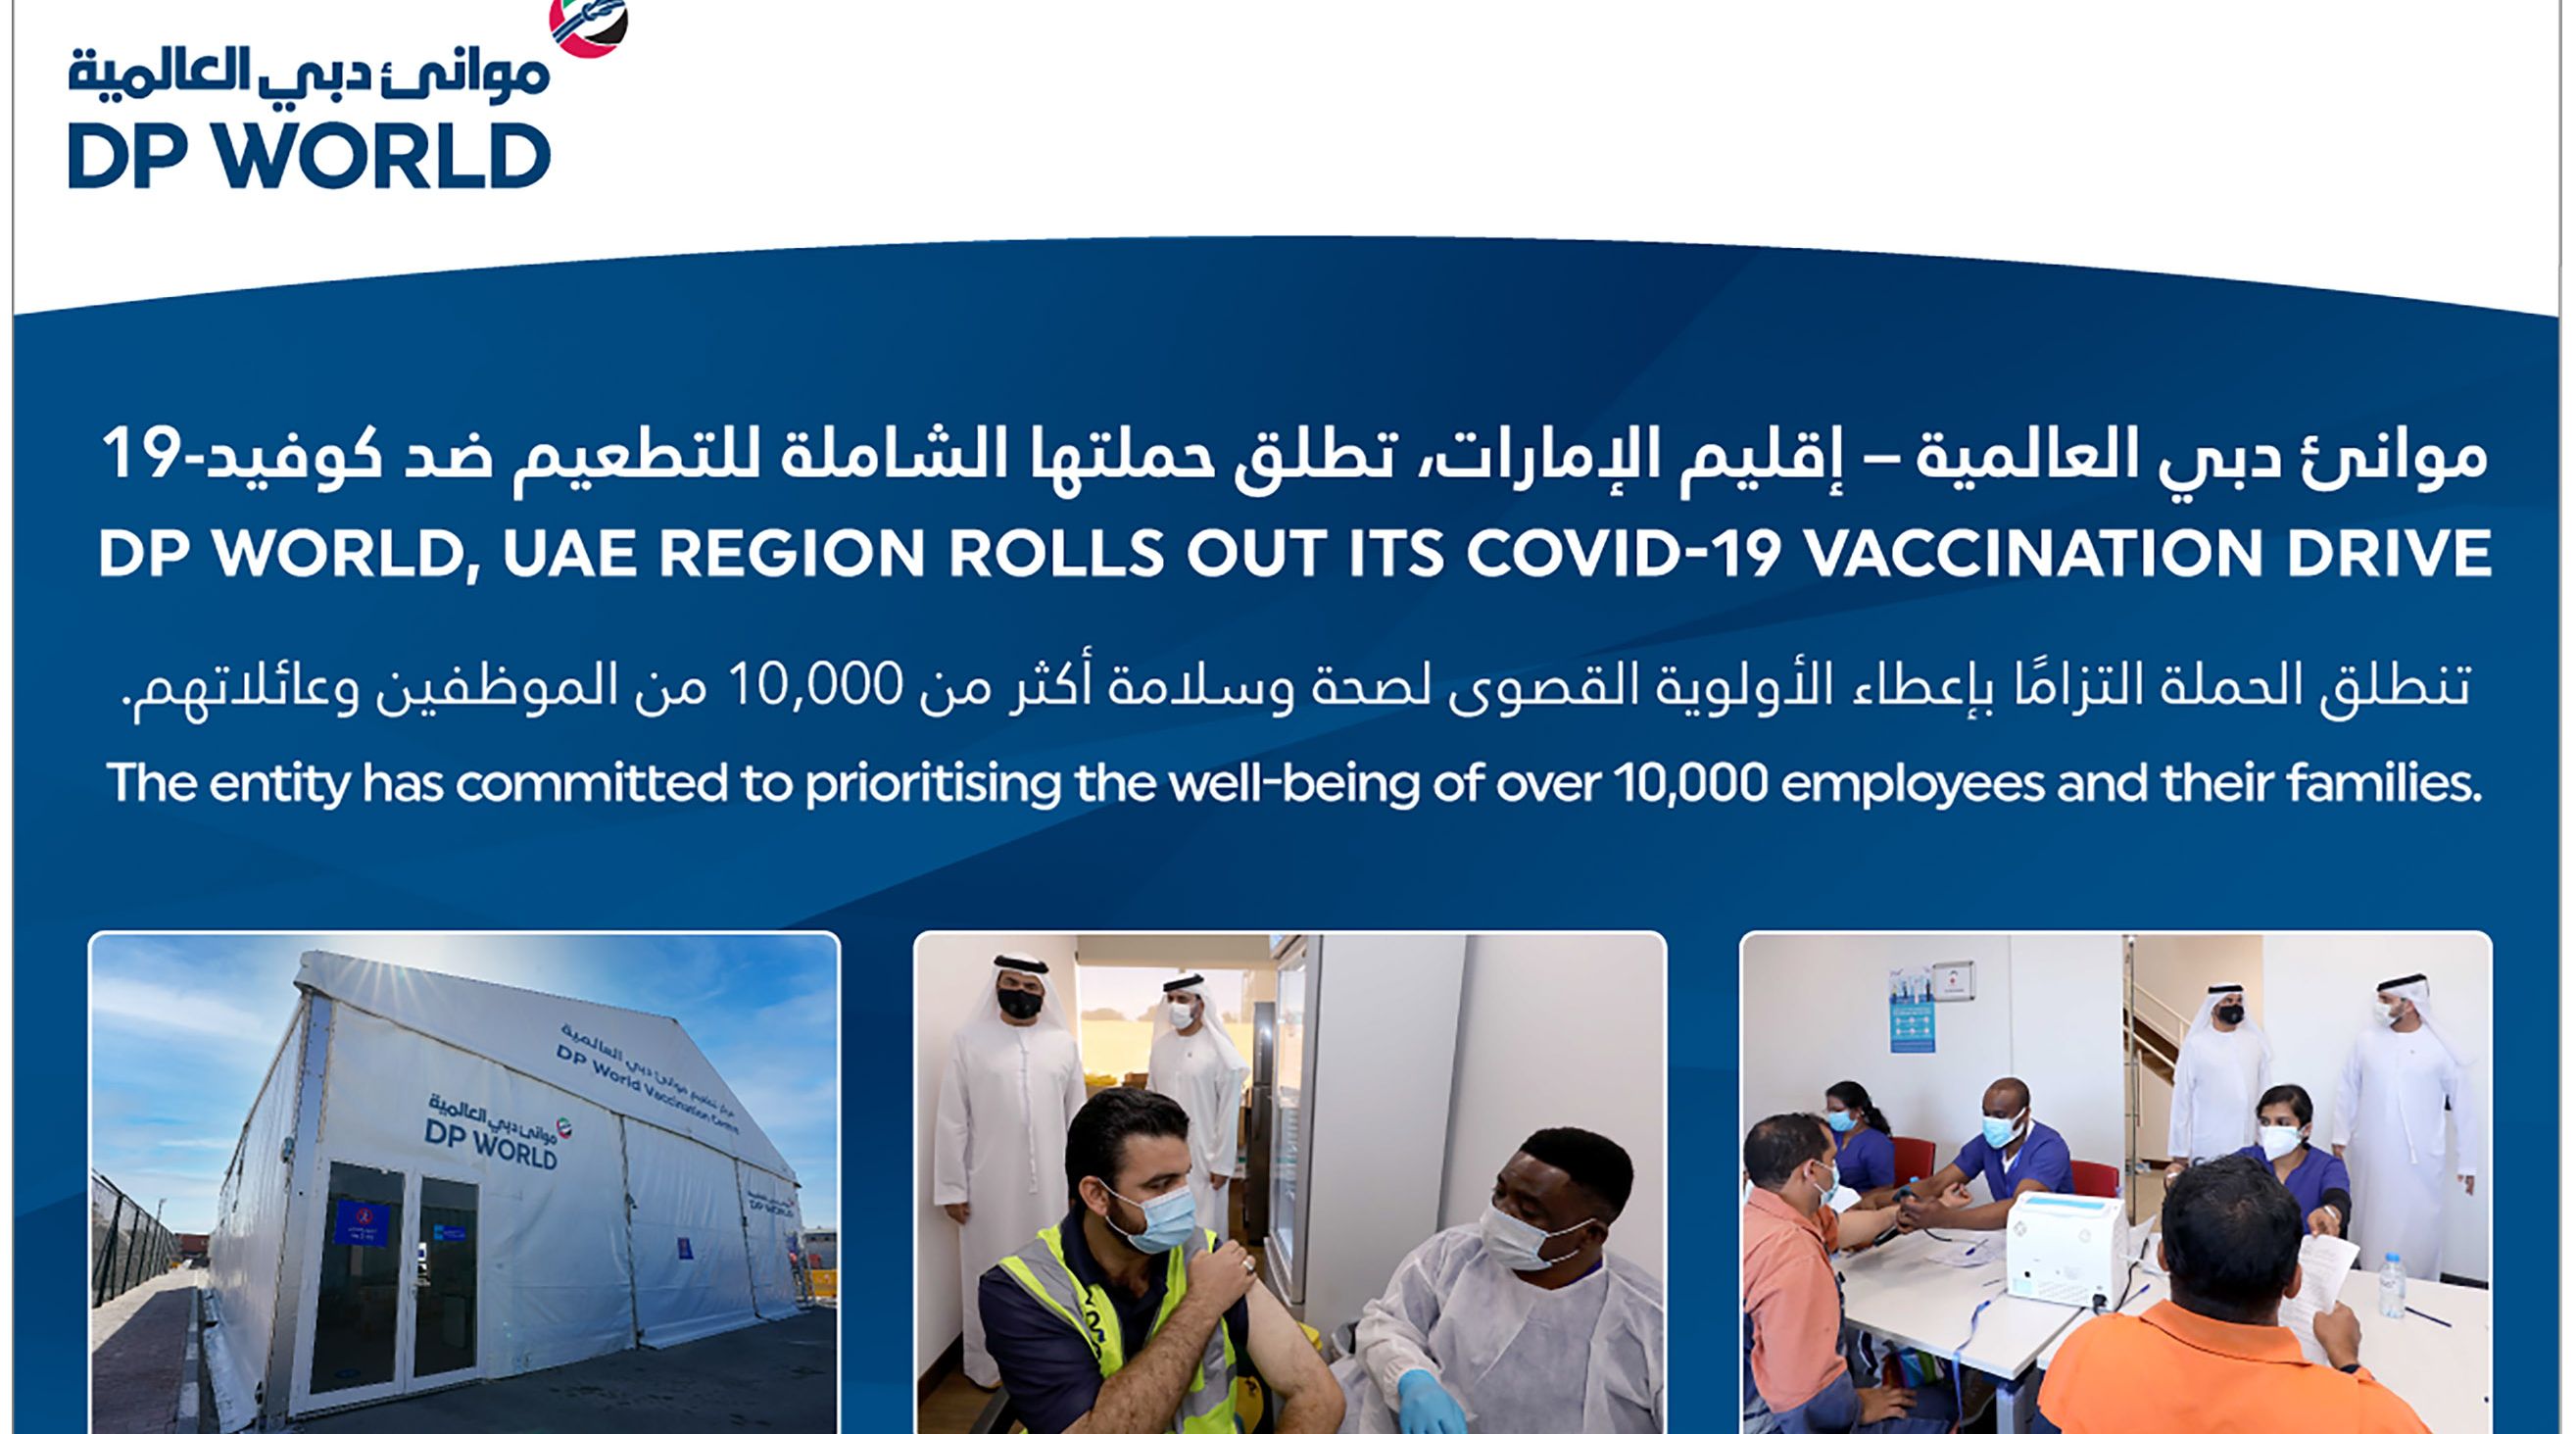 DP World rolls out COVID-19 vaccination drive for employees